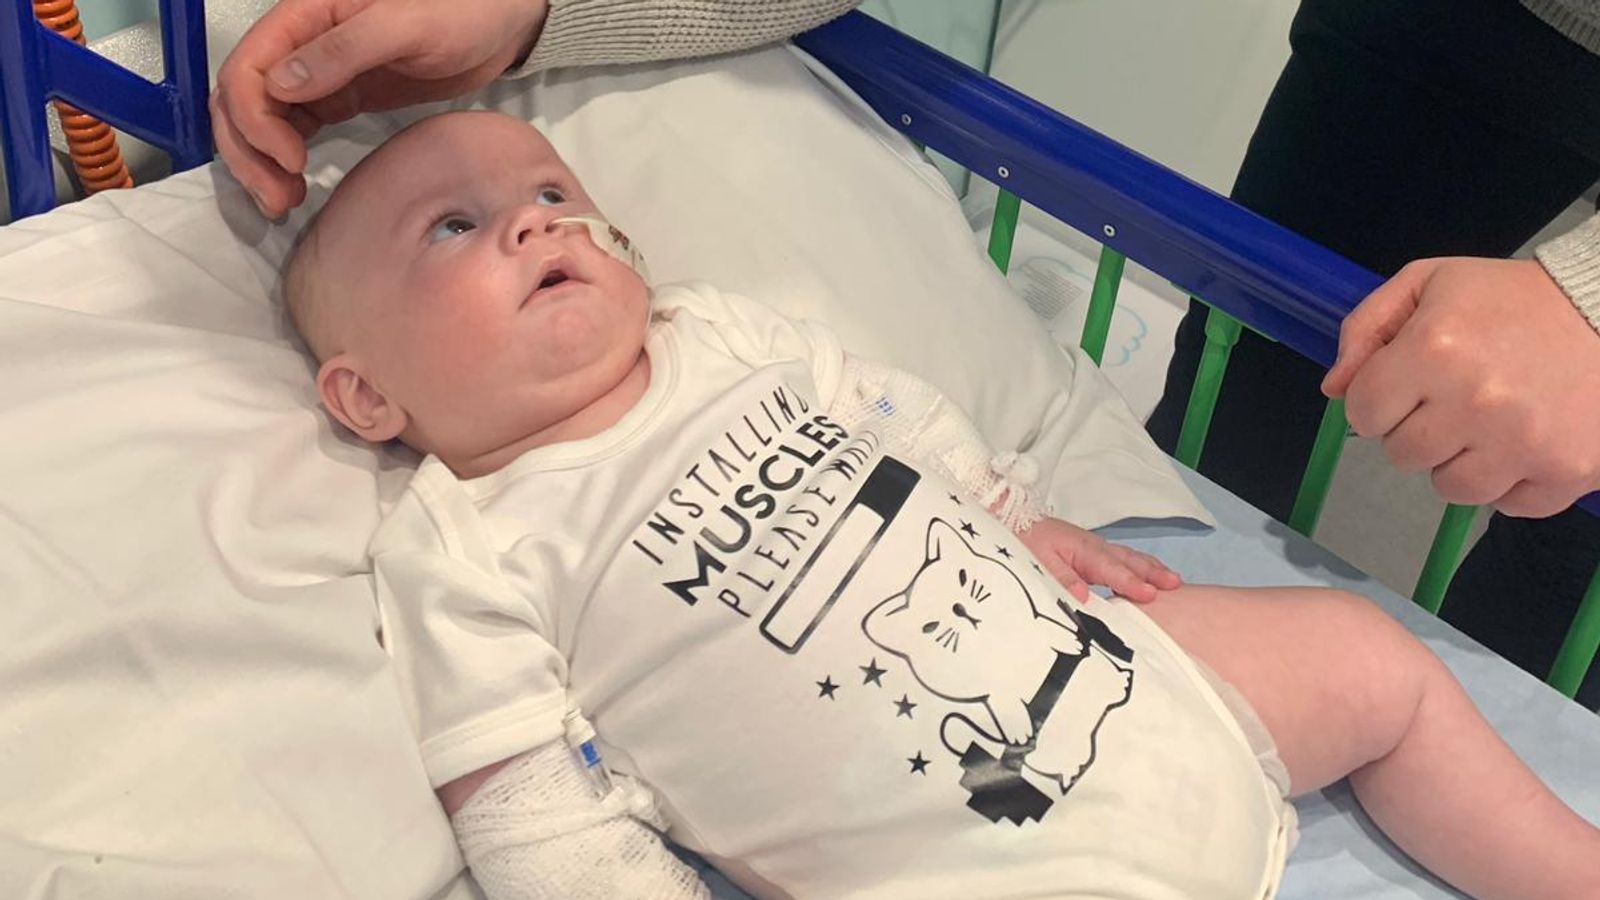 Five-month-old baby becomes first NHS patient to receive Zolgensma drug for genetic condition